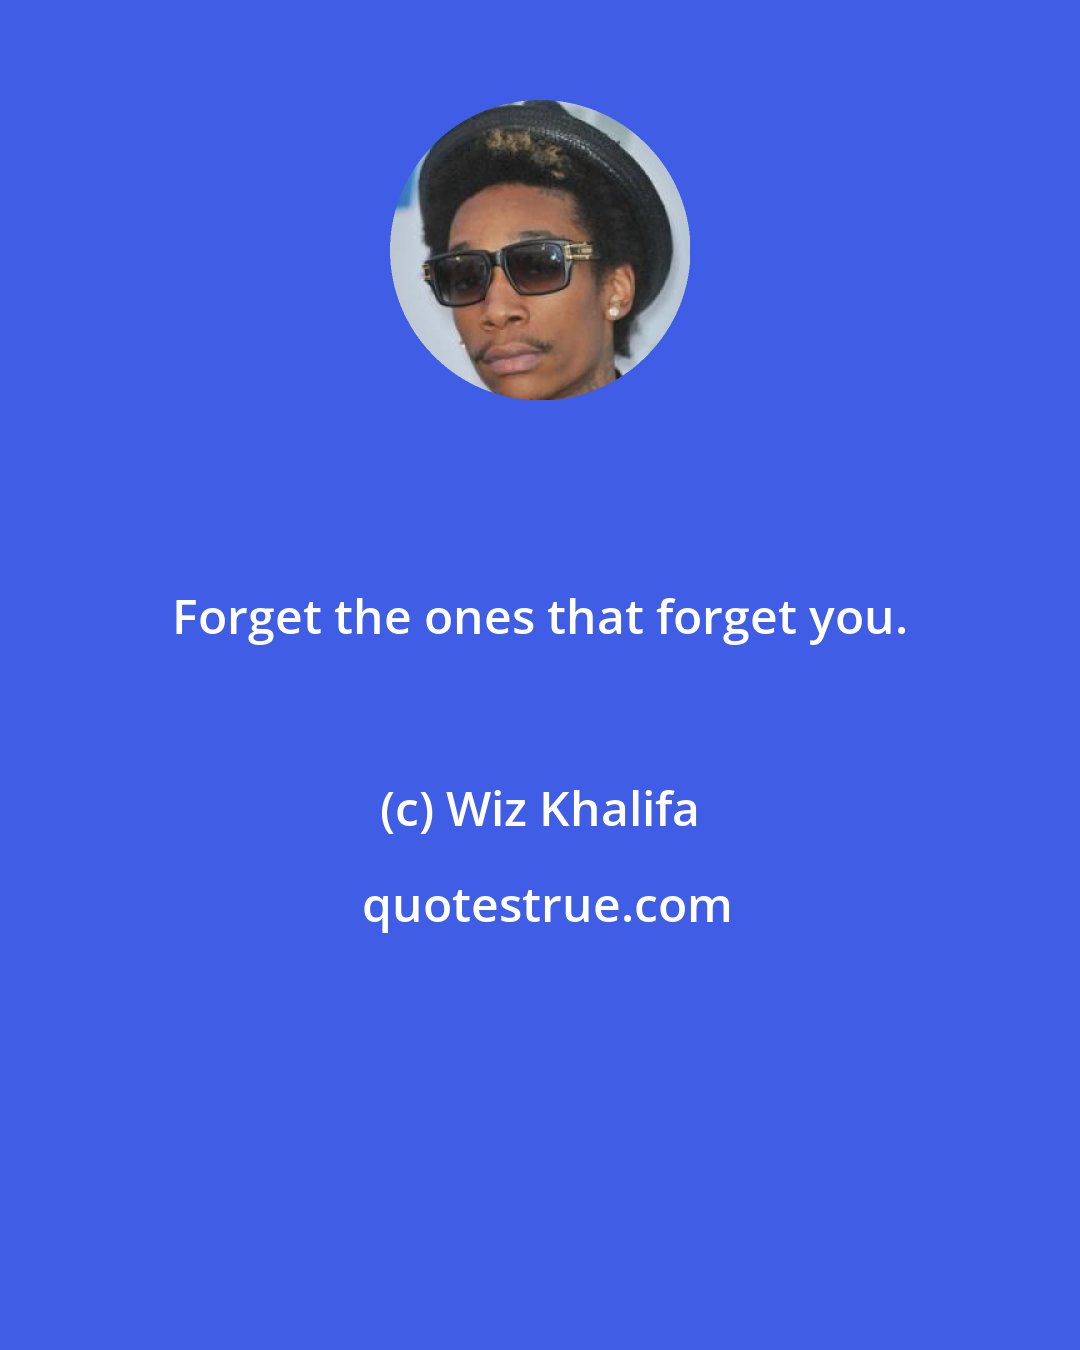 Wiz Khalifa: Forget the ones that forget you.